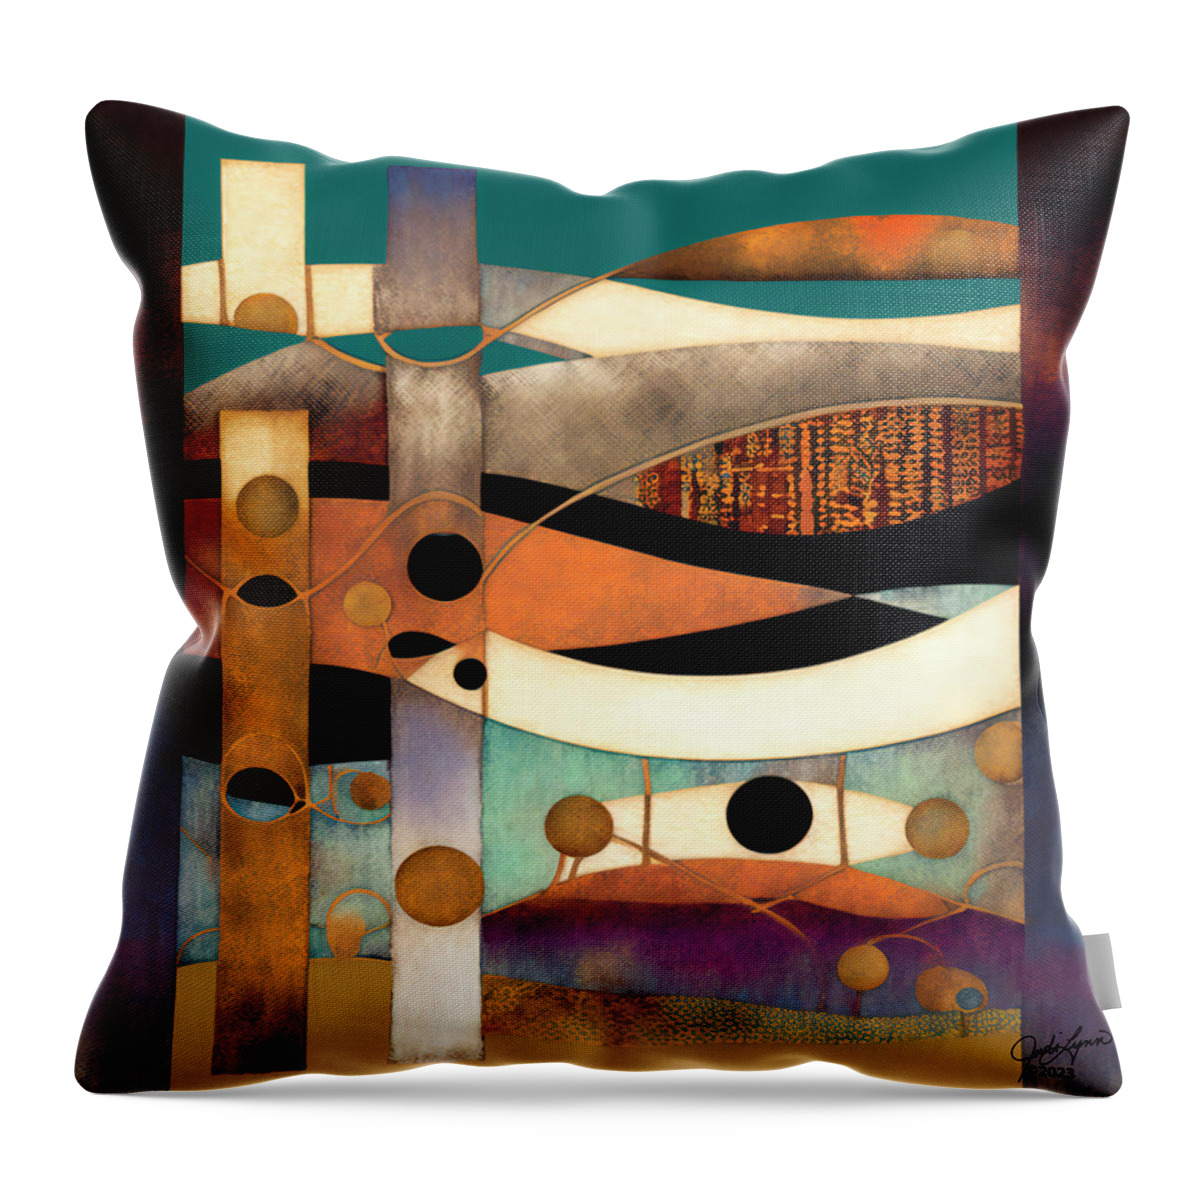 Abstraction Throw Pillow featuring the digital art Abstraction 4 by Judi Lynn